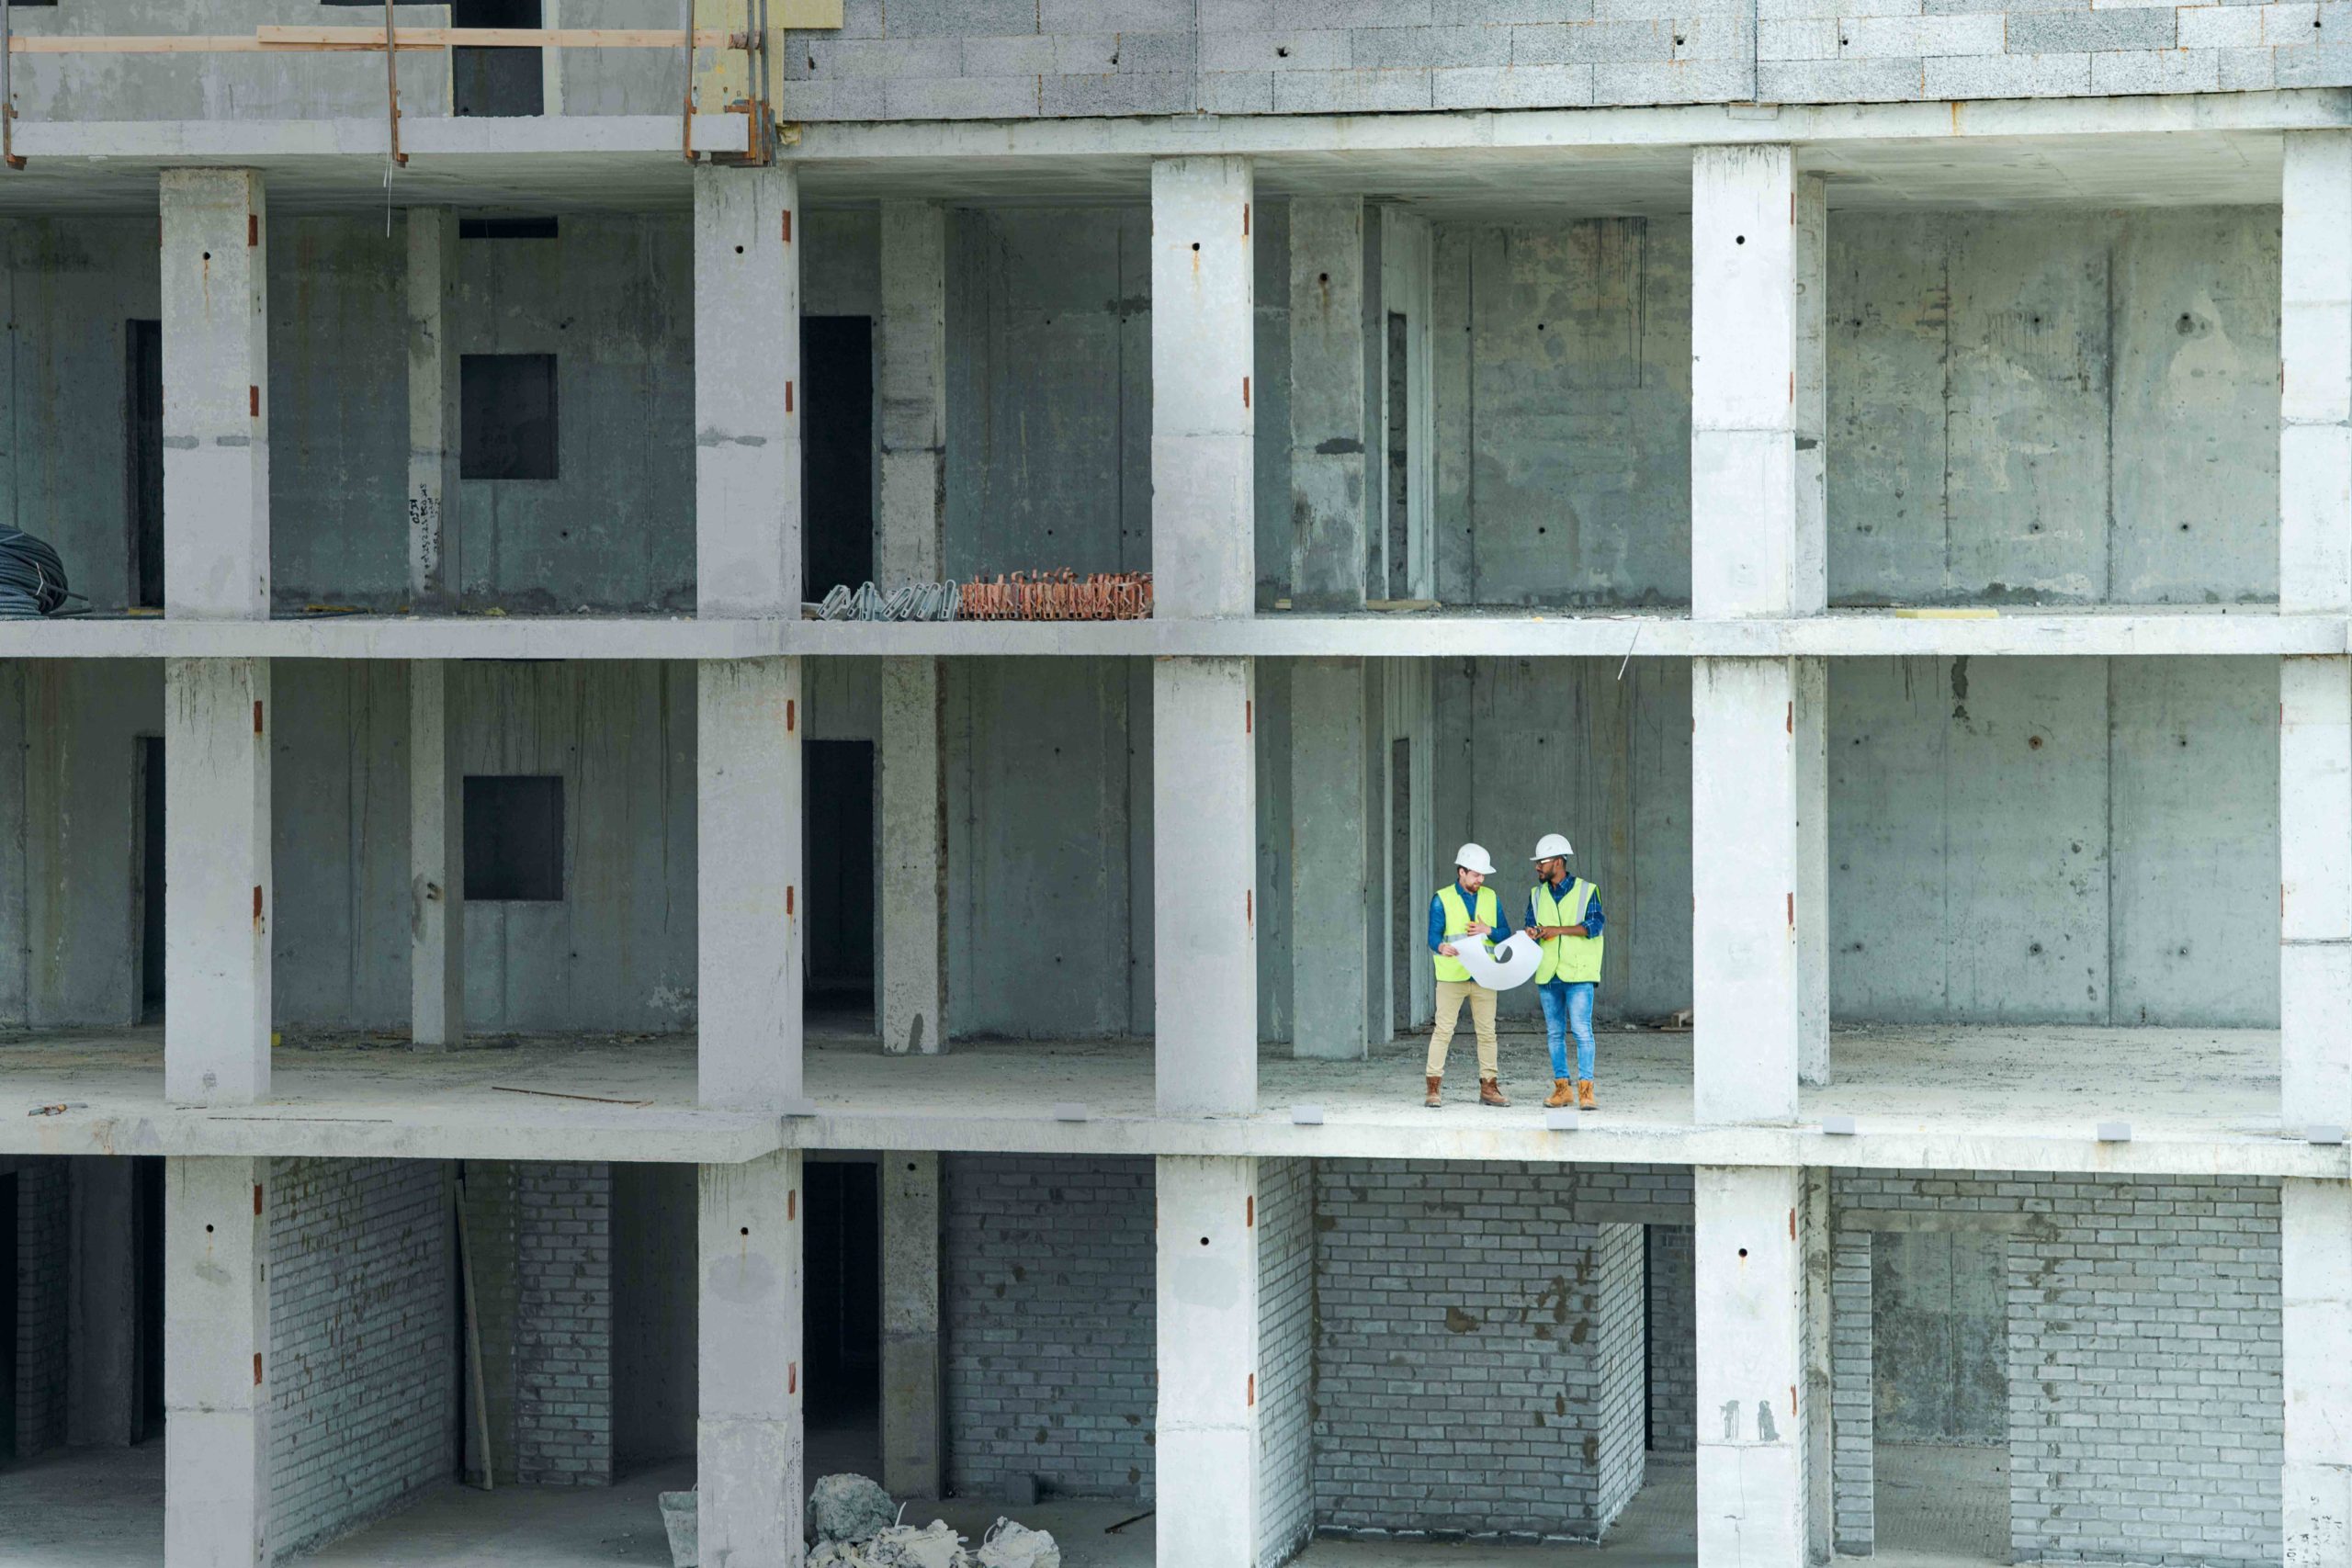 Two men with draft standing on floor of unfinished building on construction site